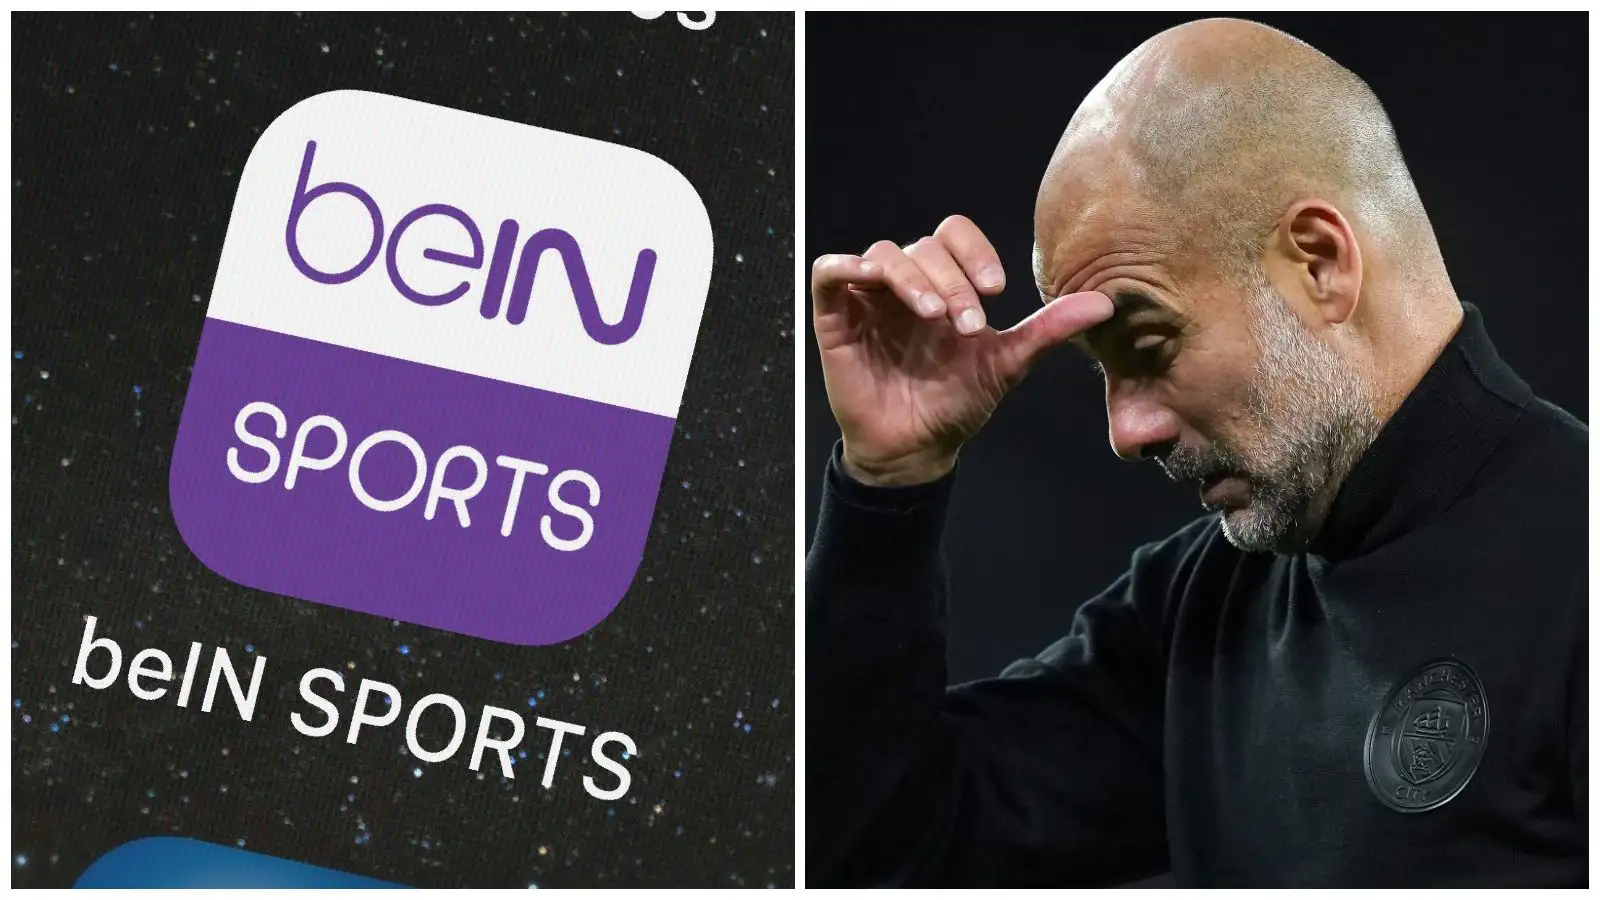 Man City manager Pep Guardiola and the BEIN Sports logo